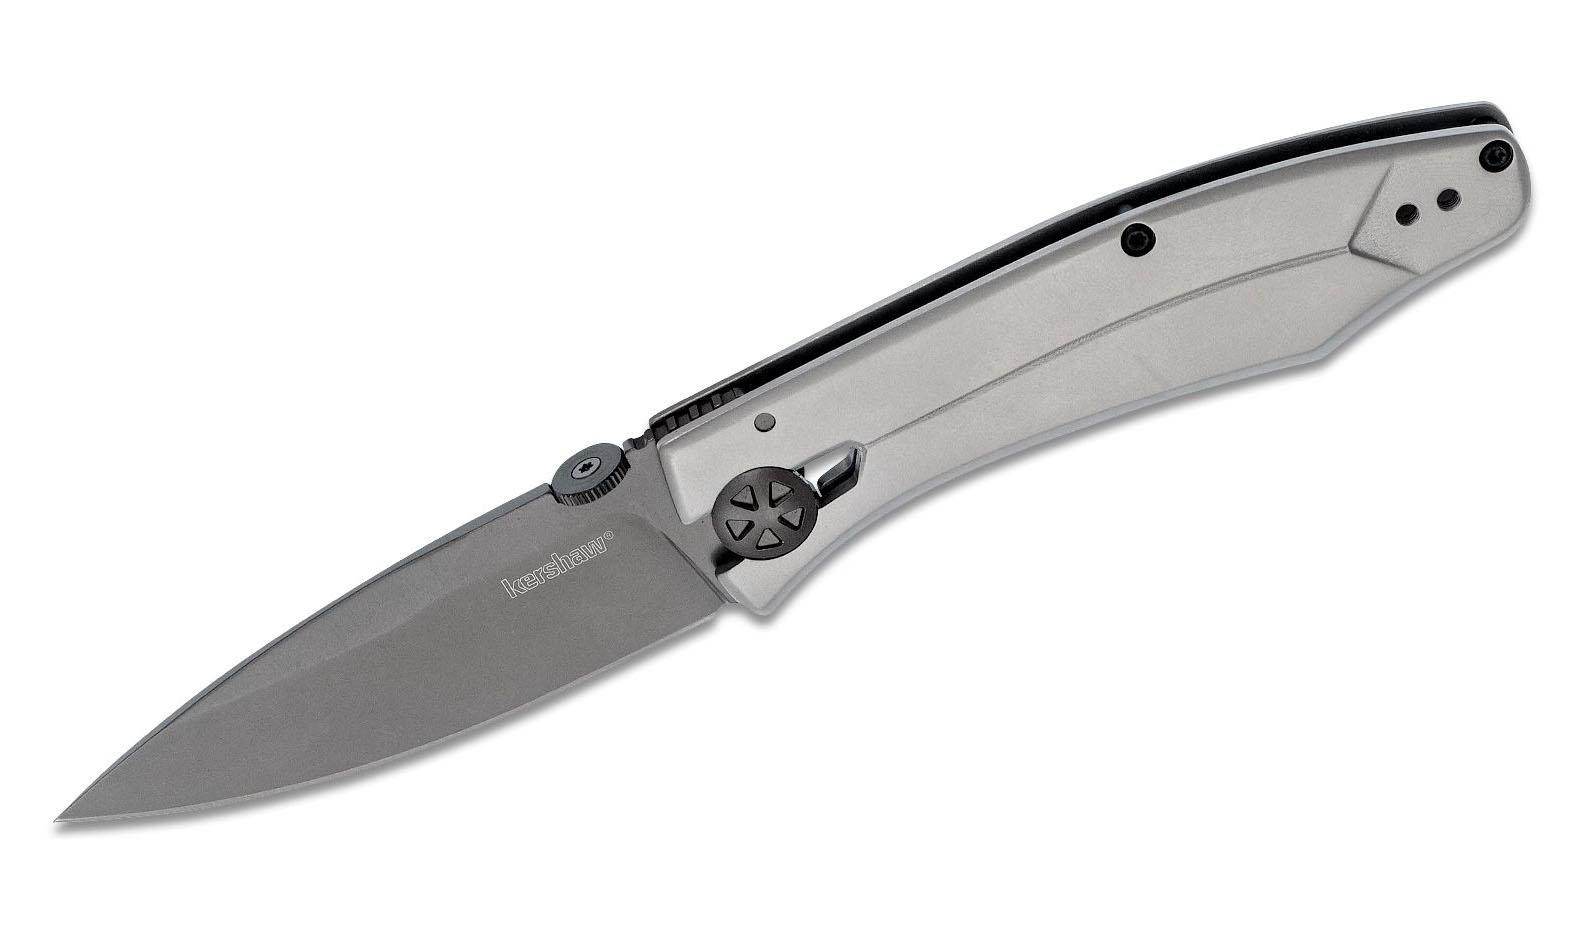 Kershaw Innuendo Knife for $22.99